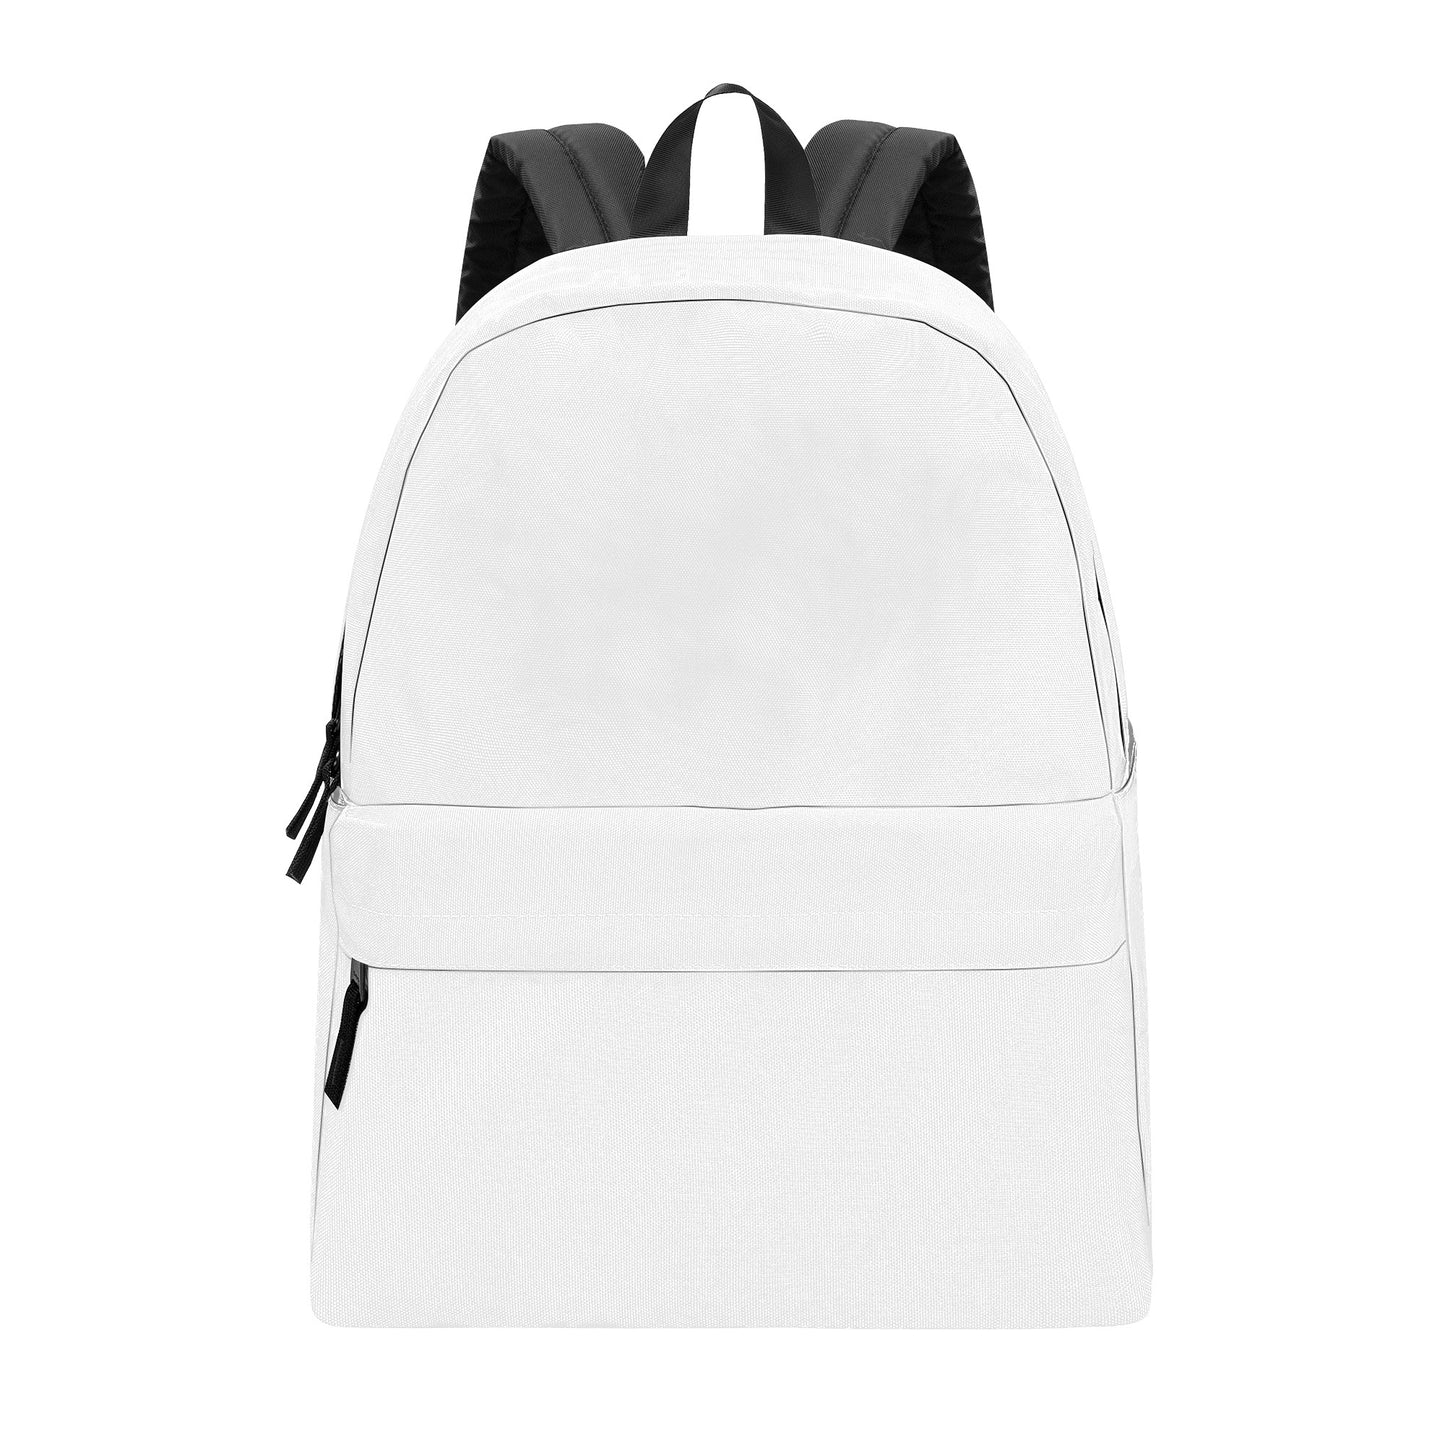 Create Your Own - All Over Print Backpack